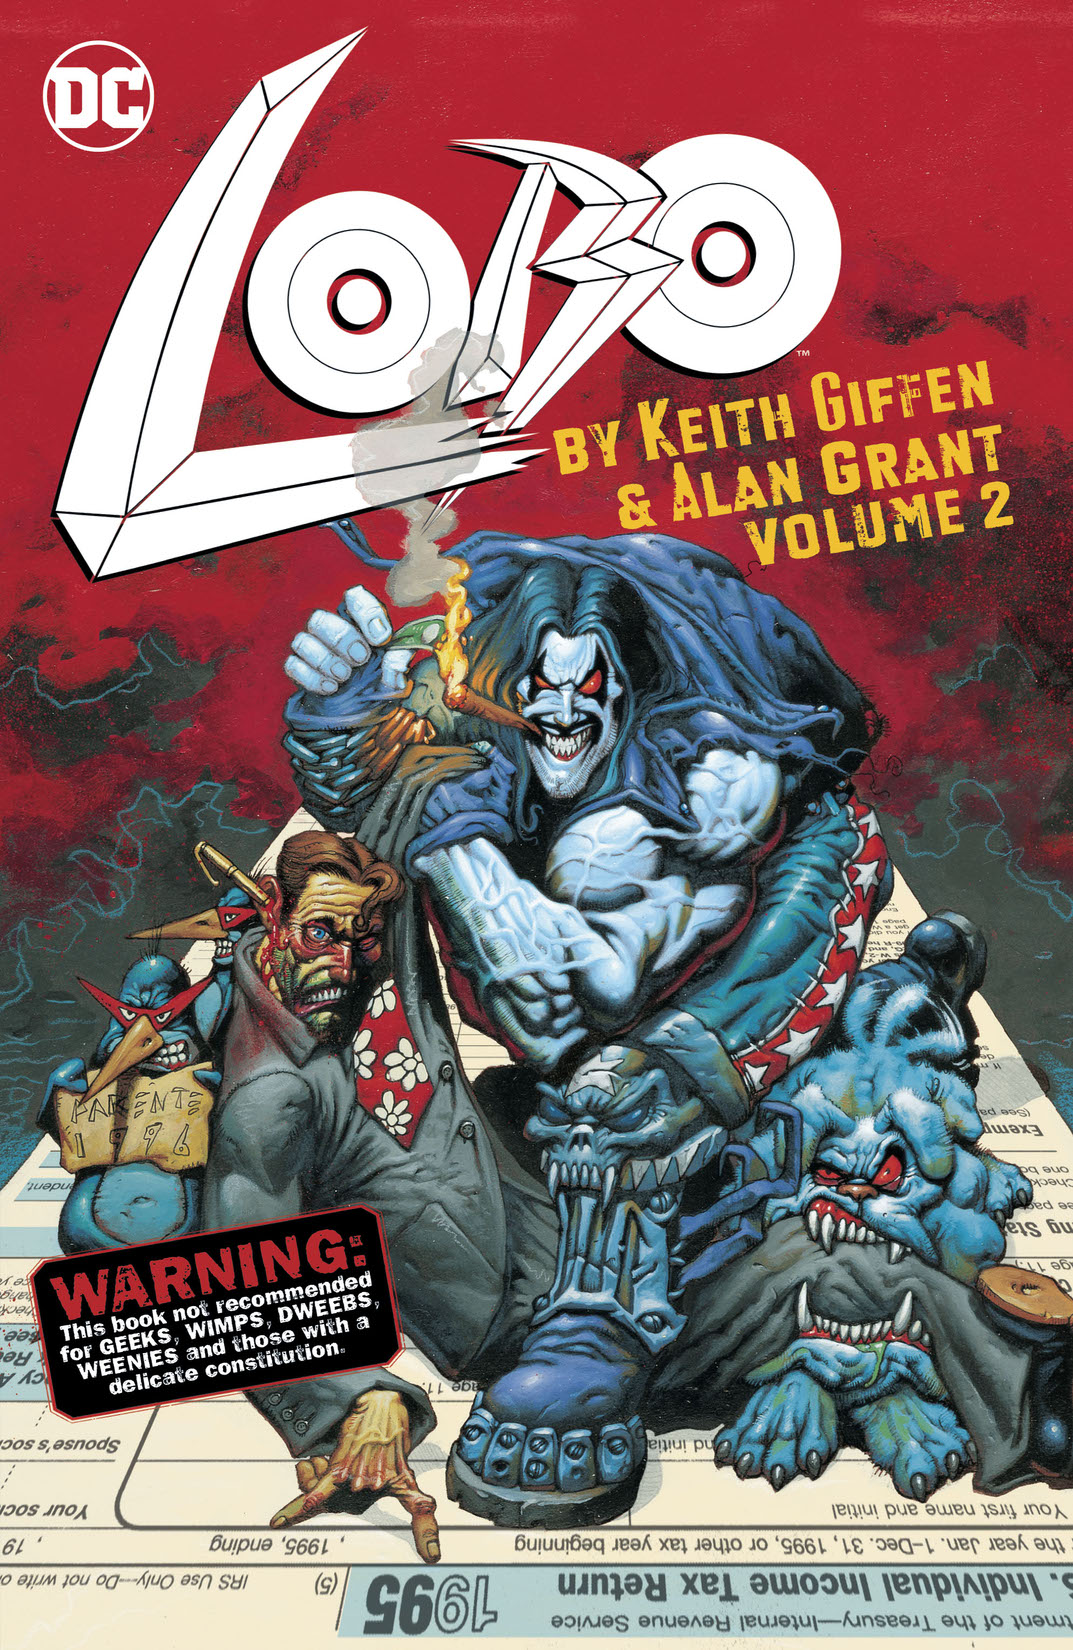 Lobo by Keith Giffen & Alan Grant Vol. 2 preview images